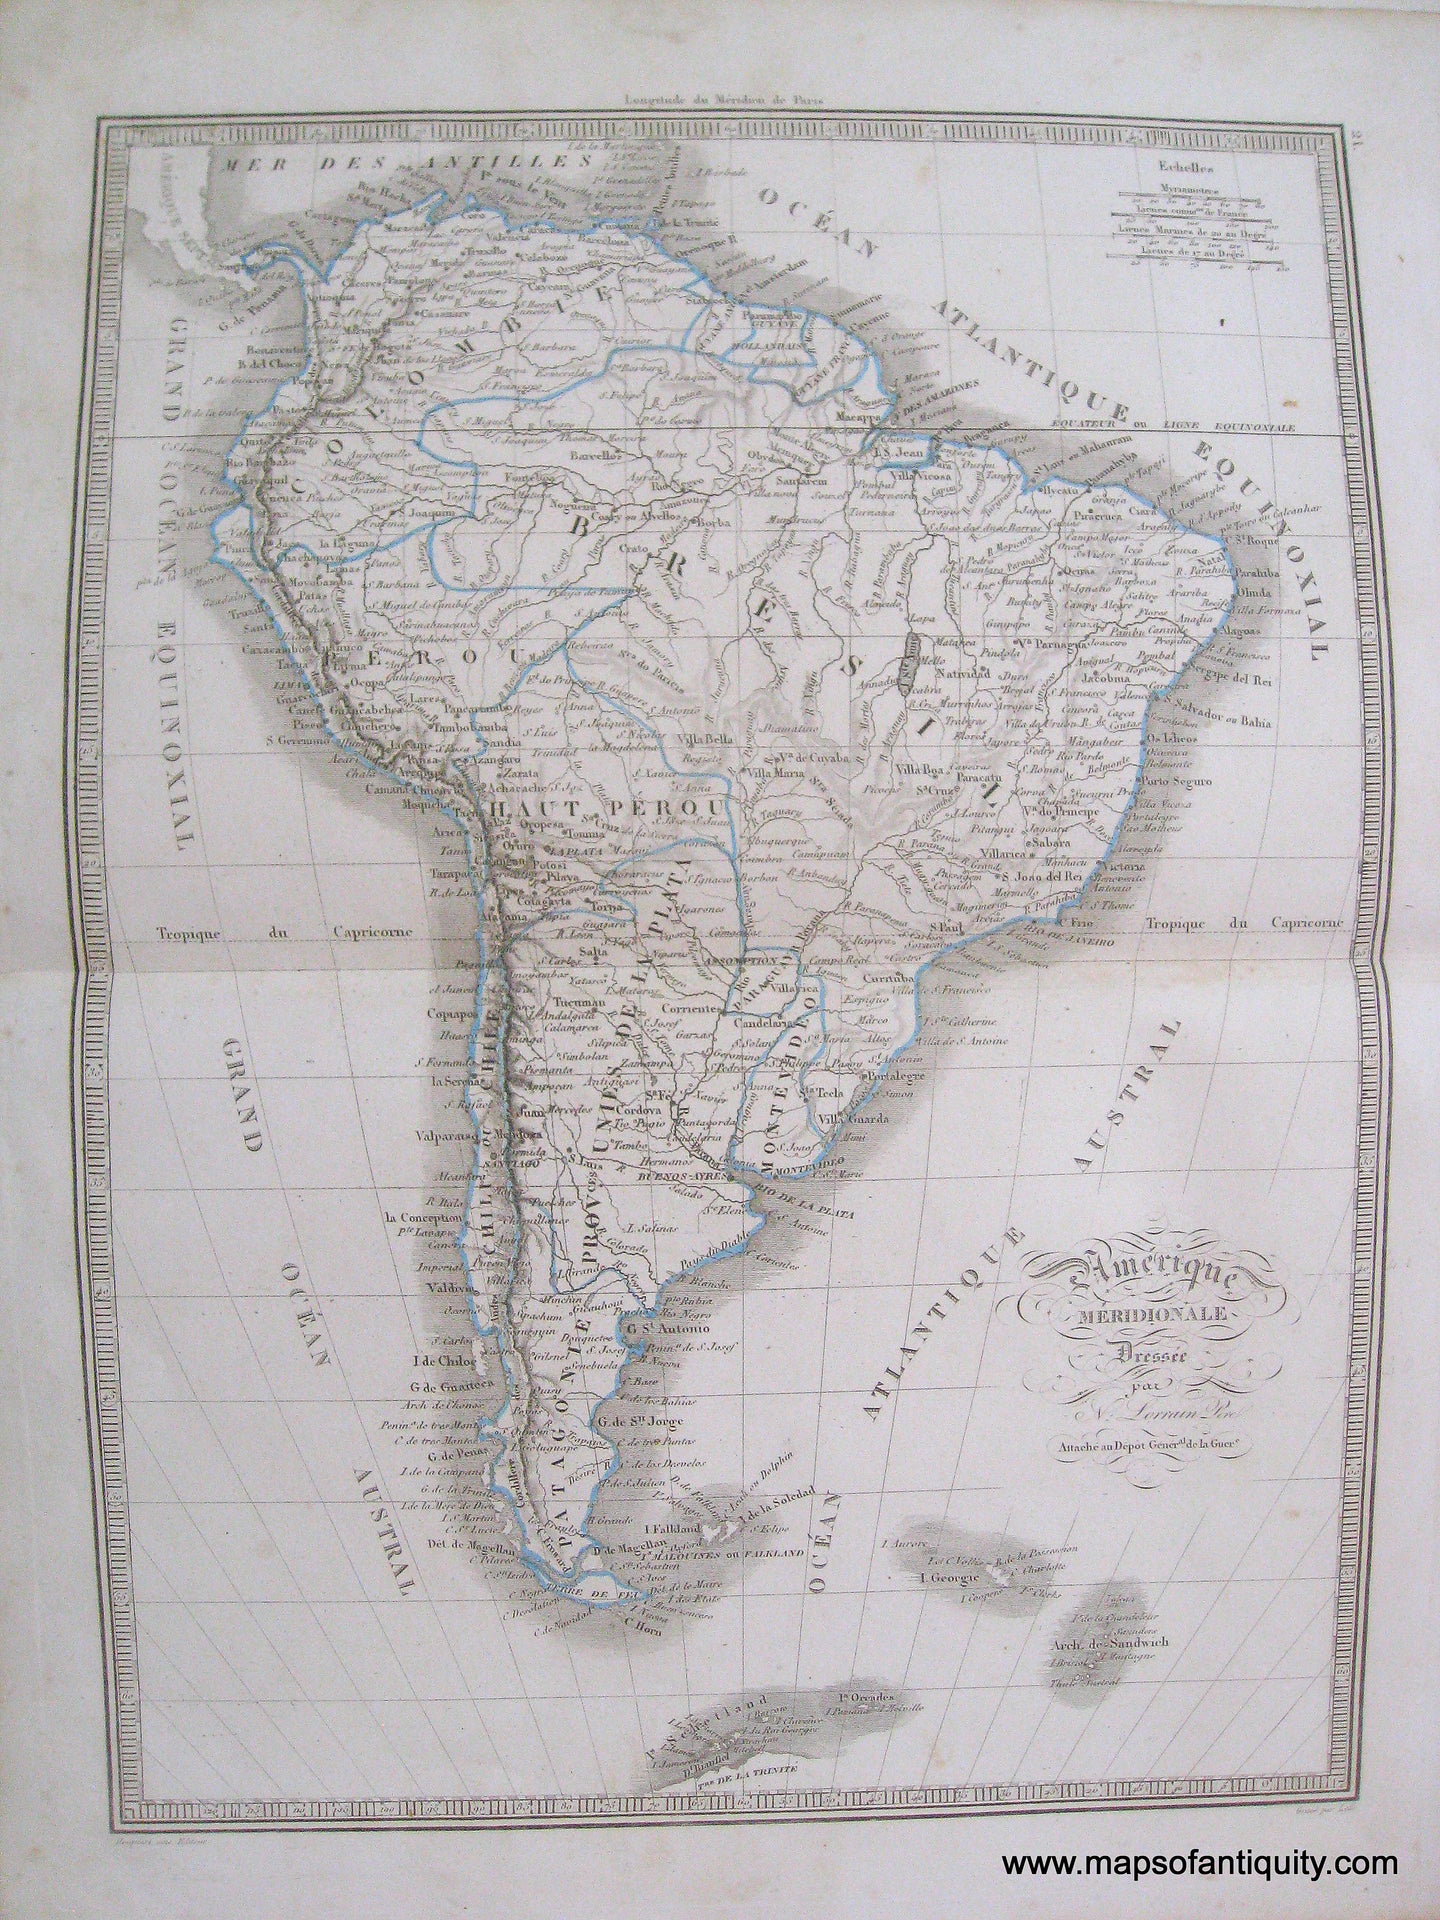 Antique-Hand-Colored-Map-Amerique-Meridionale-(-South-America-)-1846-Monin-1800s-19th-century-Maps-of-Antiquity